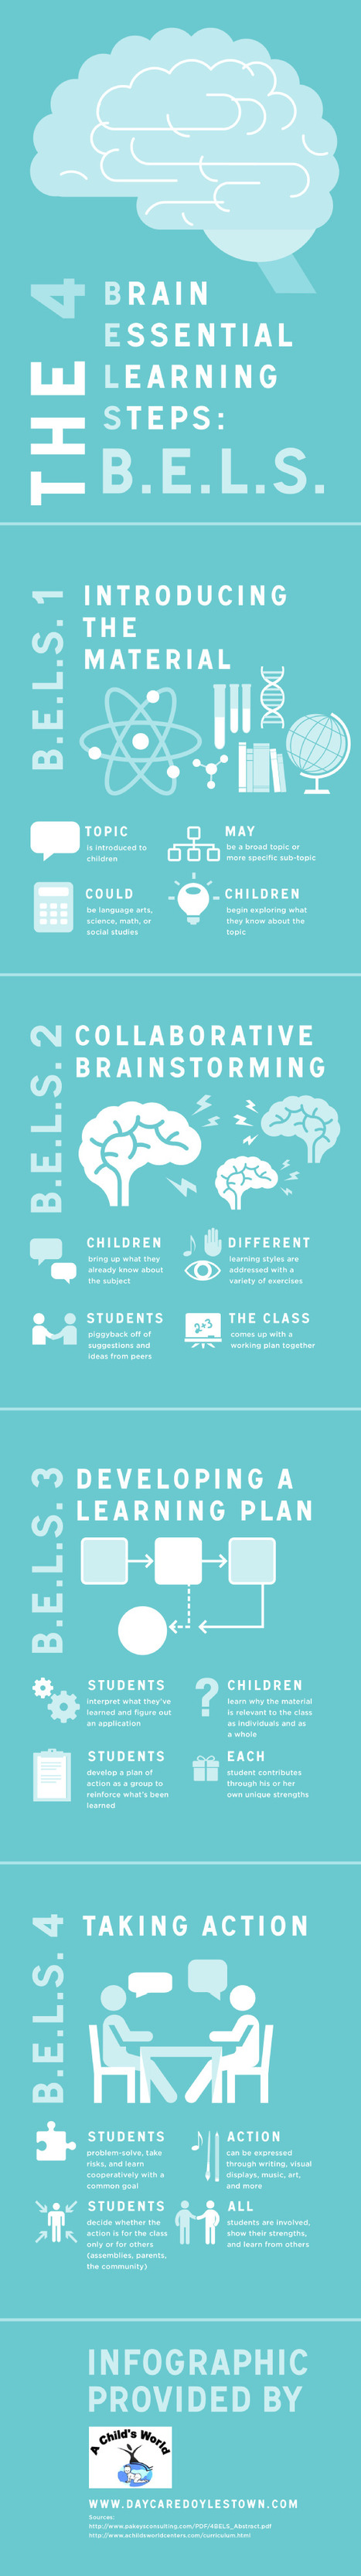 The 4 Brain Essential Learning Steps [Infographic] | Pedalogica: educación y TIC | Scoop.it